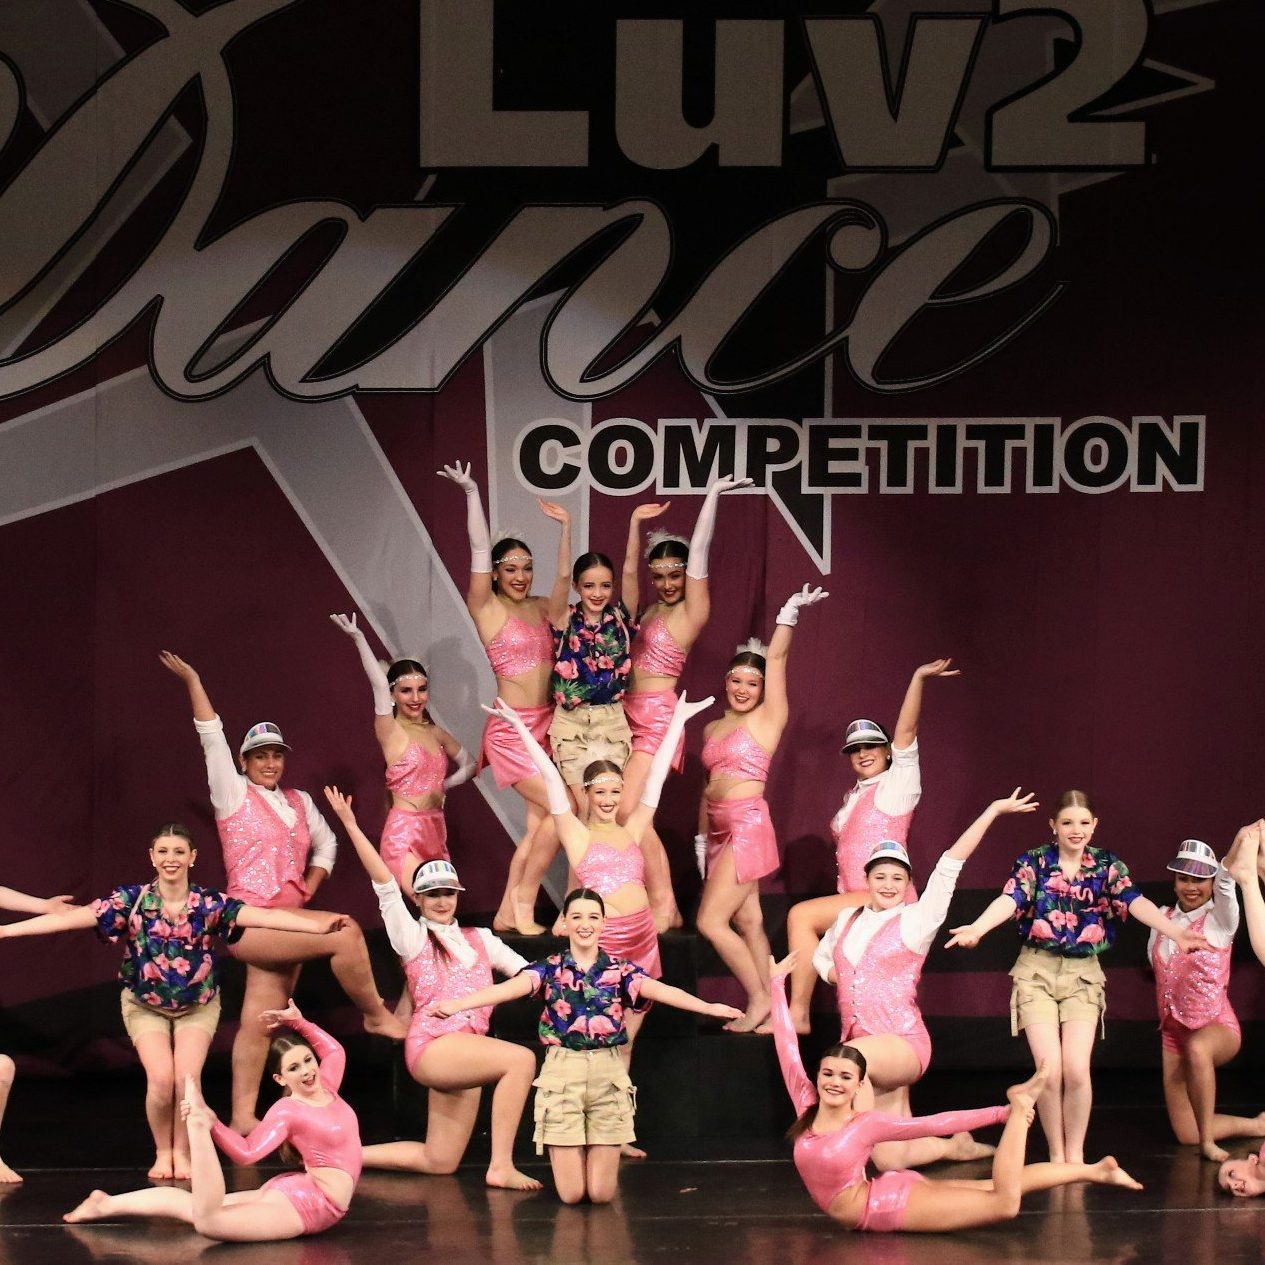 ATJ competitive team 2022 in the ending pose for the production dance number.